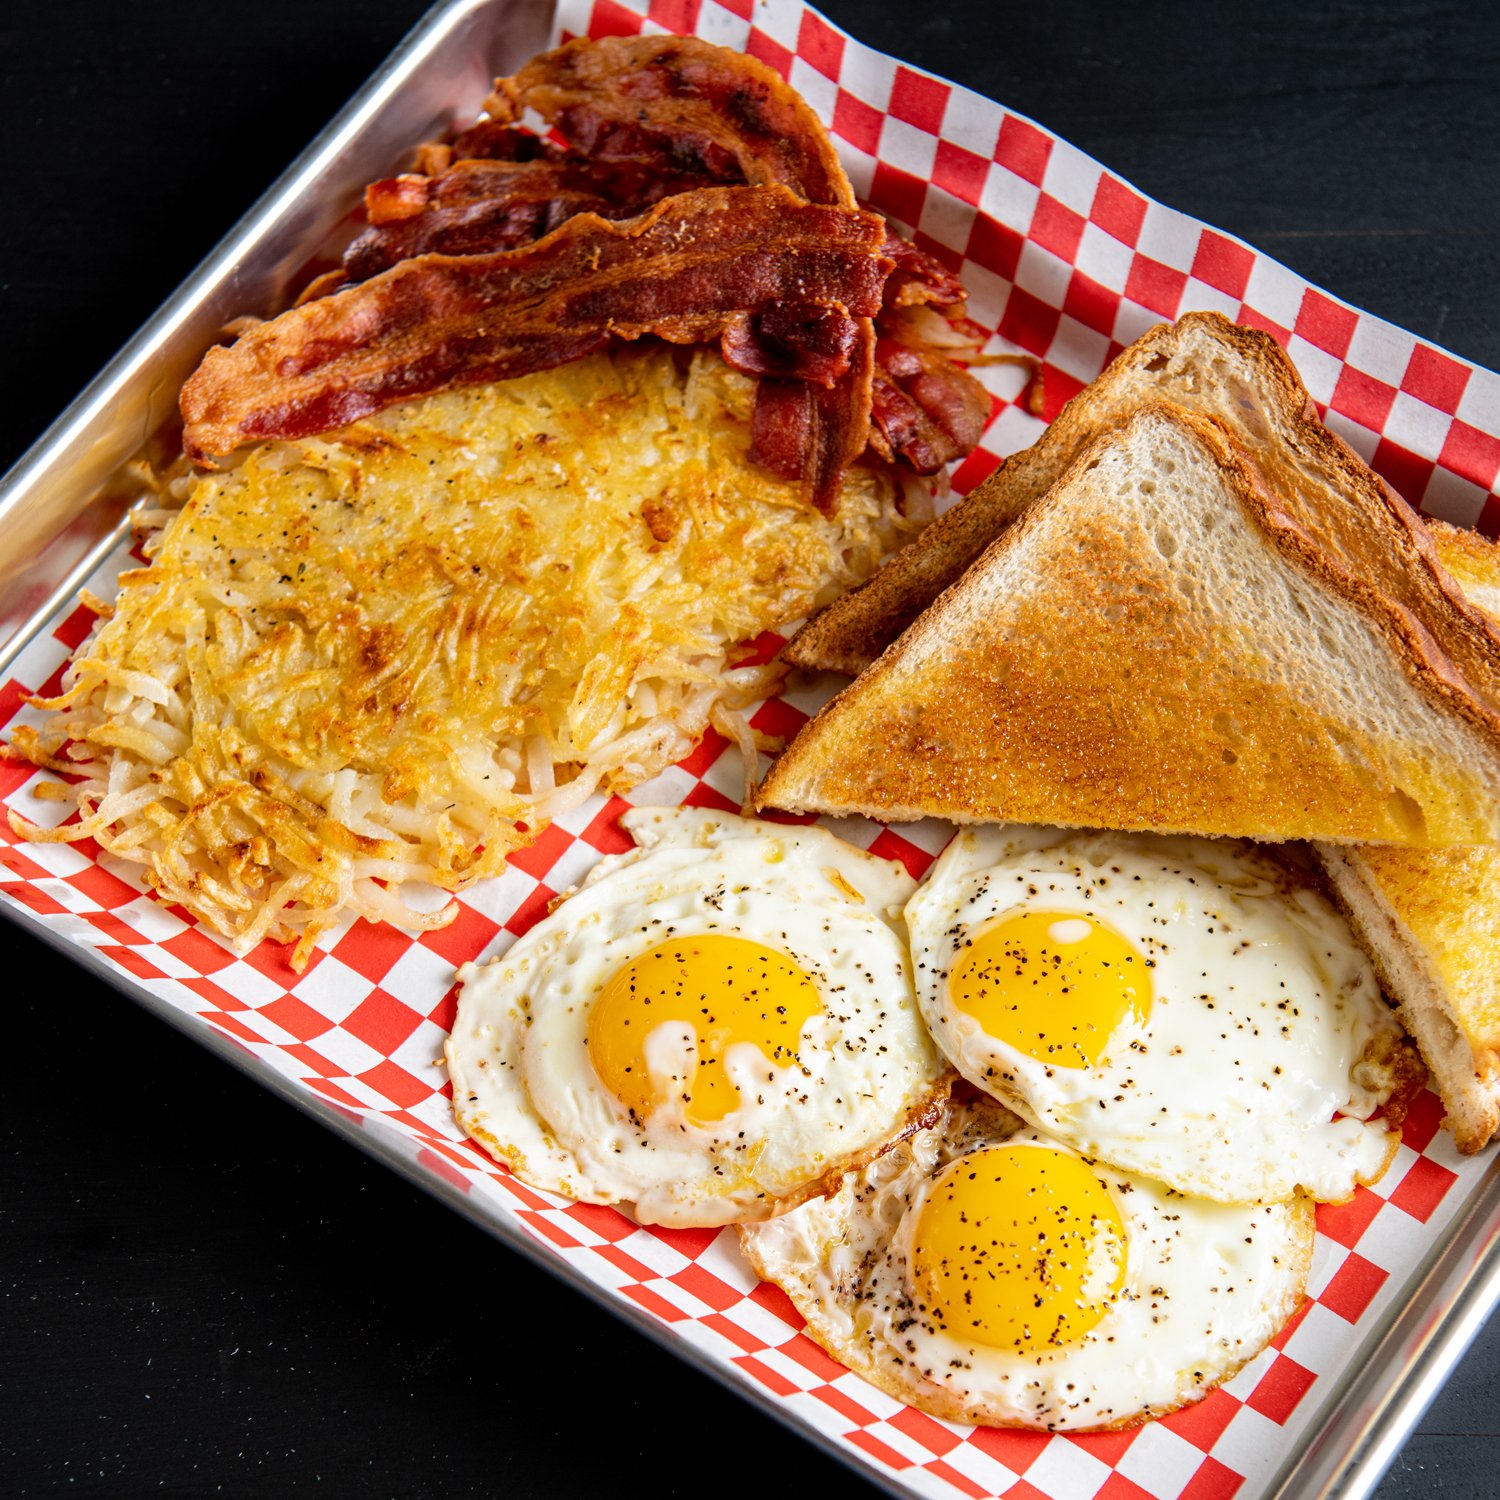 Shout out to our breakfast lover @ltquattrobajeena! We got the classic hot American Diner breakfast to warm your soul. Come start the week right with a full plate! 📸 @kimfoxfoodphoto

#DinosOGBreakfast #Breakfast #Breakfastlove #DinosOG #losangelese